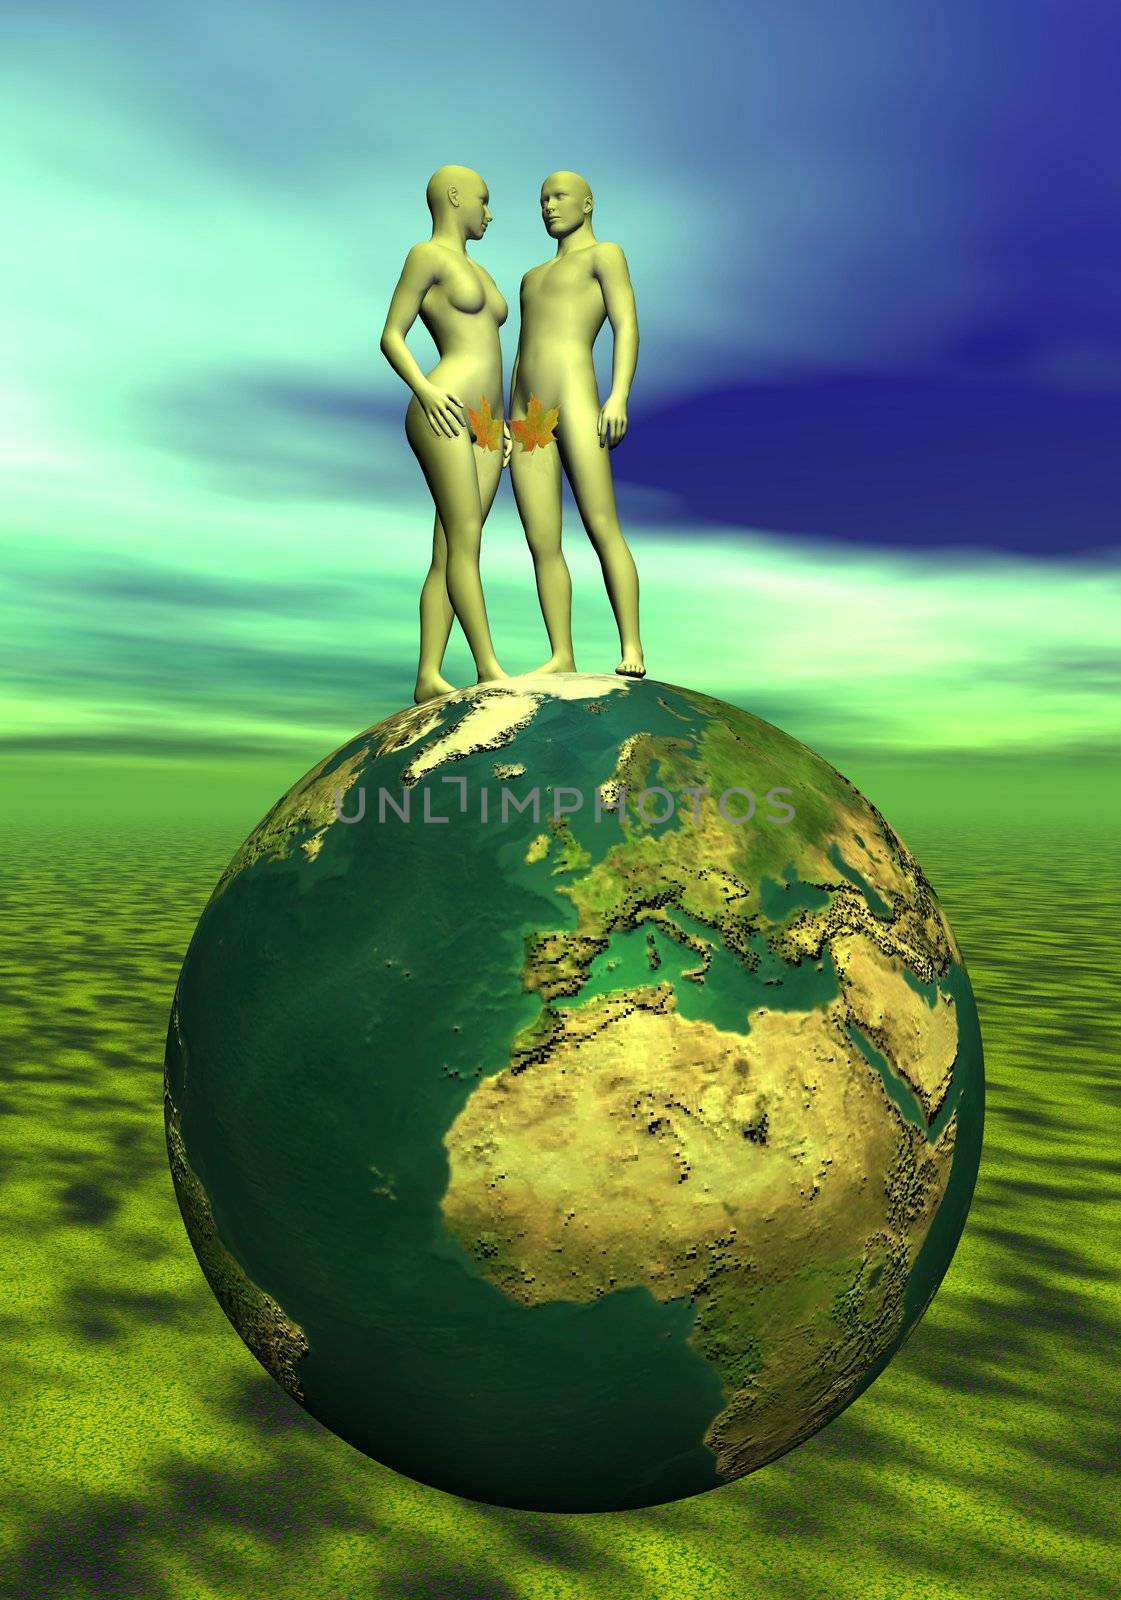 Adam and Eve upon the earth by Elenaphotos21